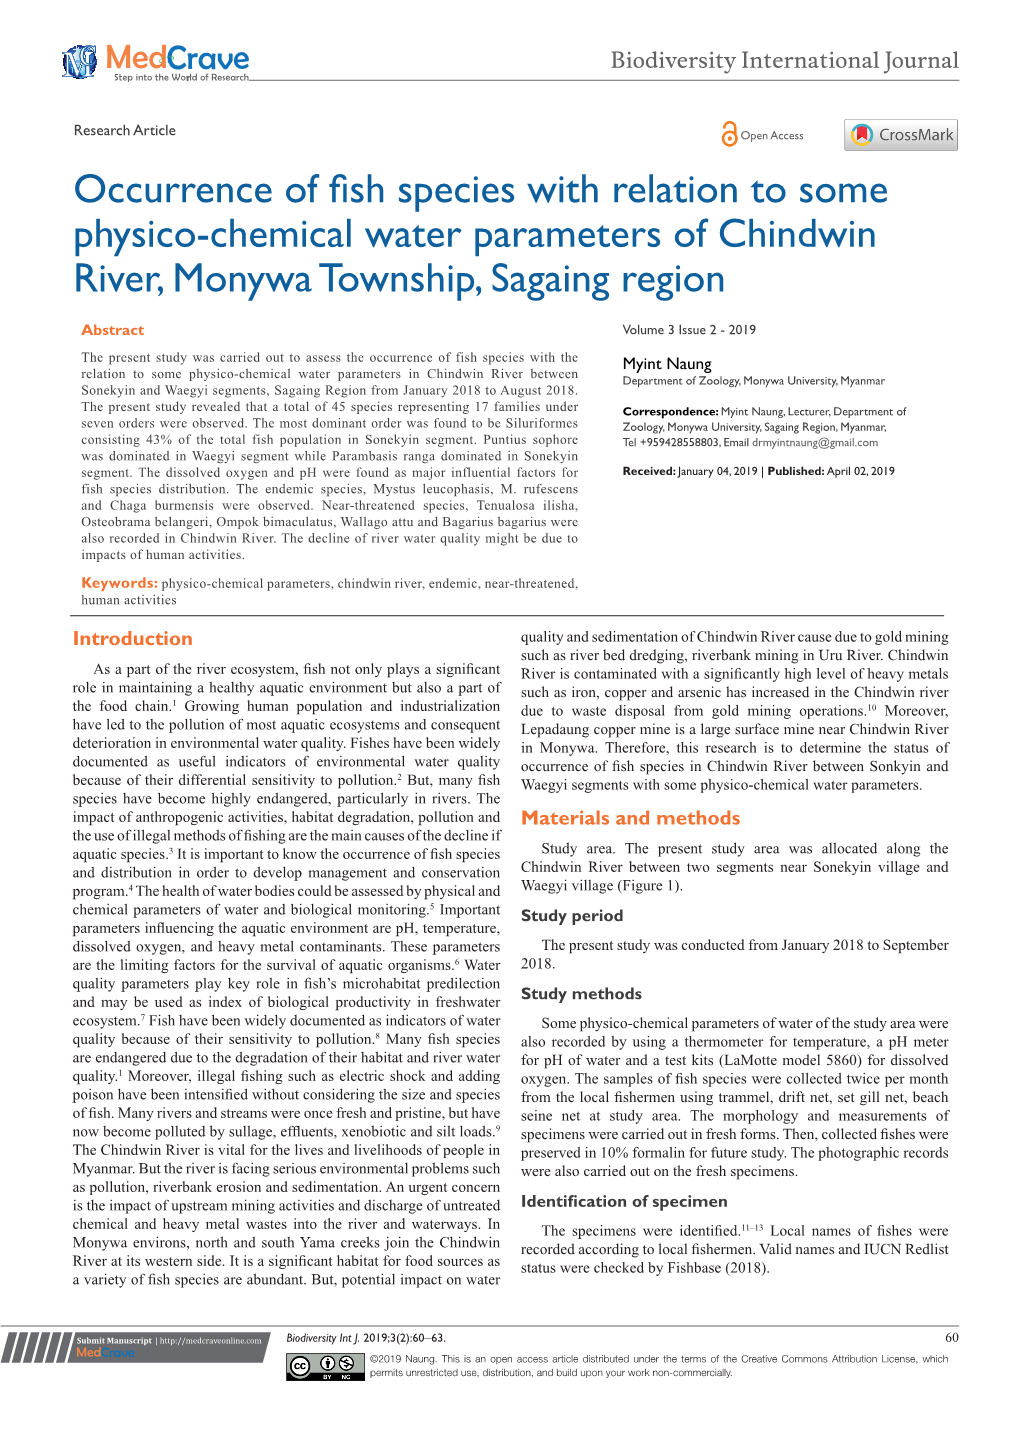 Occurrence of Fish Species with Relation to Some Physico-Chemical Water Parameters of Chindwin River, Monywa Township, Sagaing Region